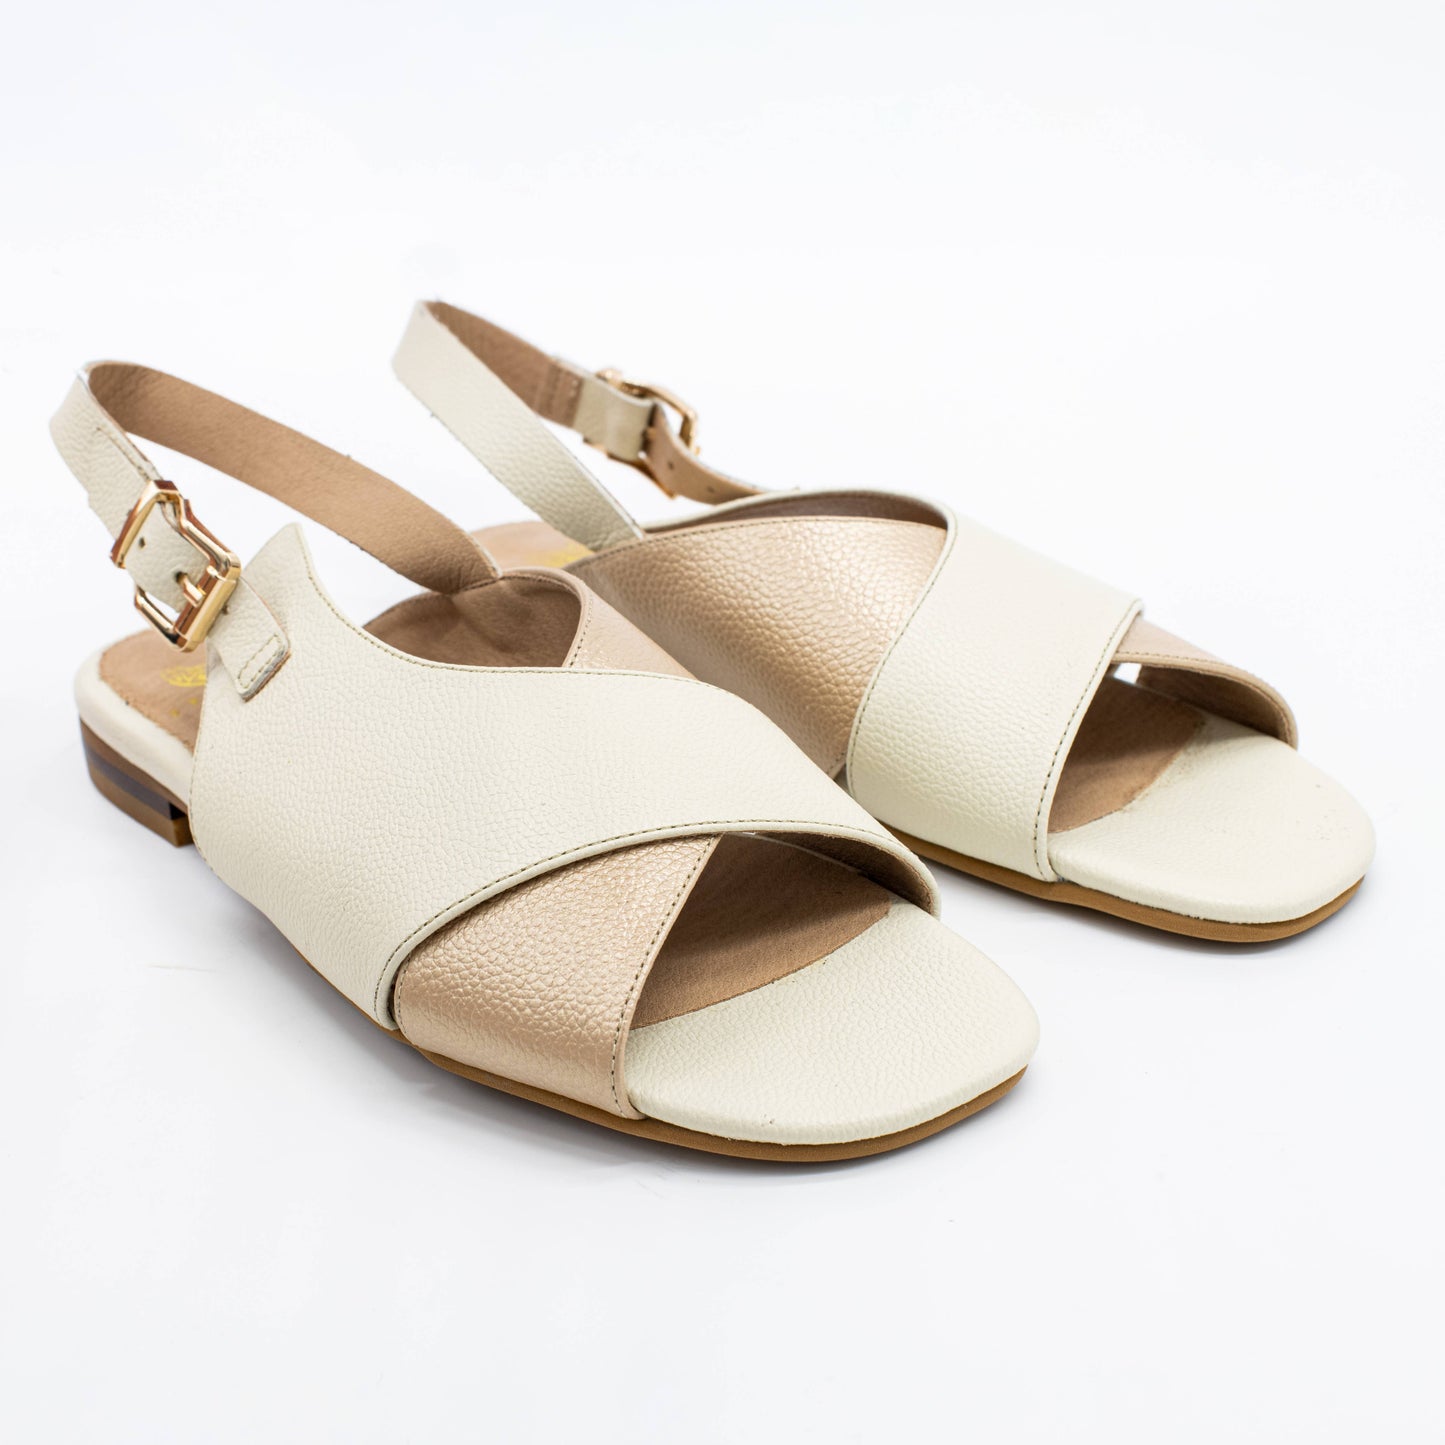 The Empower Sandals in ivory/gold leather